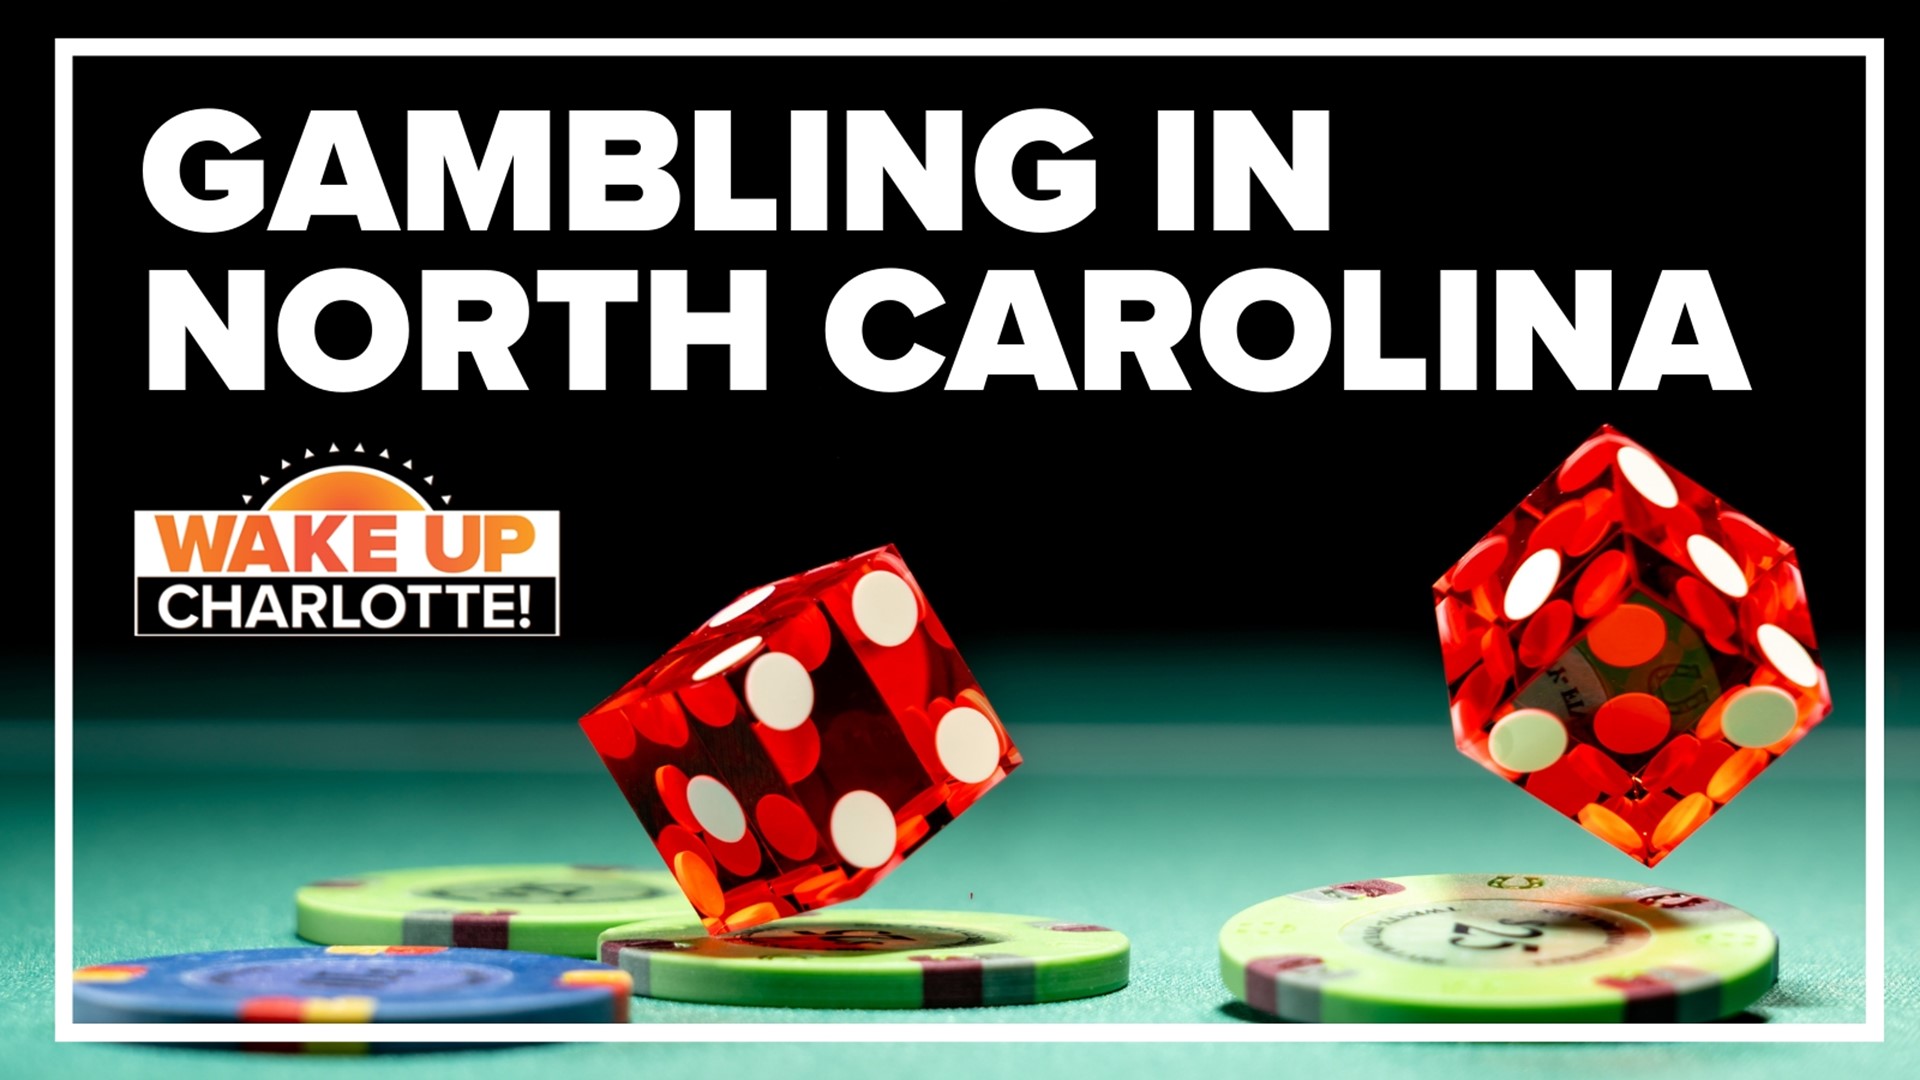 The push comes at a time when dozens of other states have allowed sports wagering.